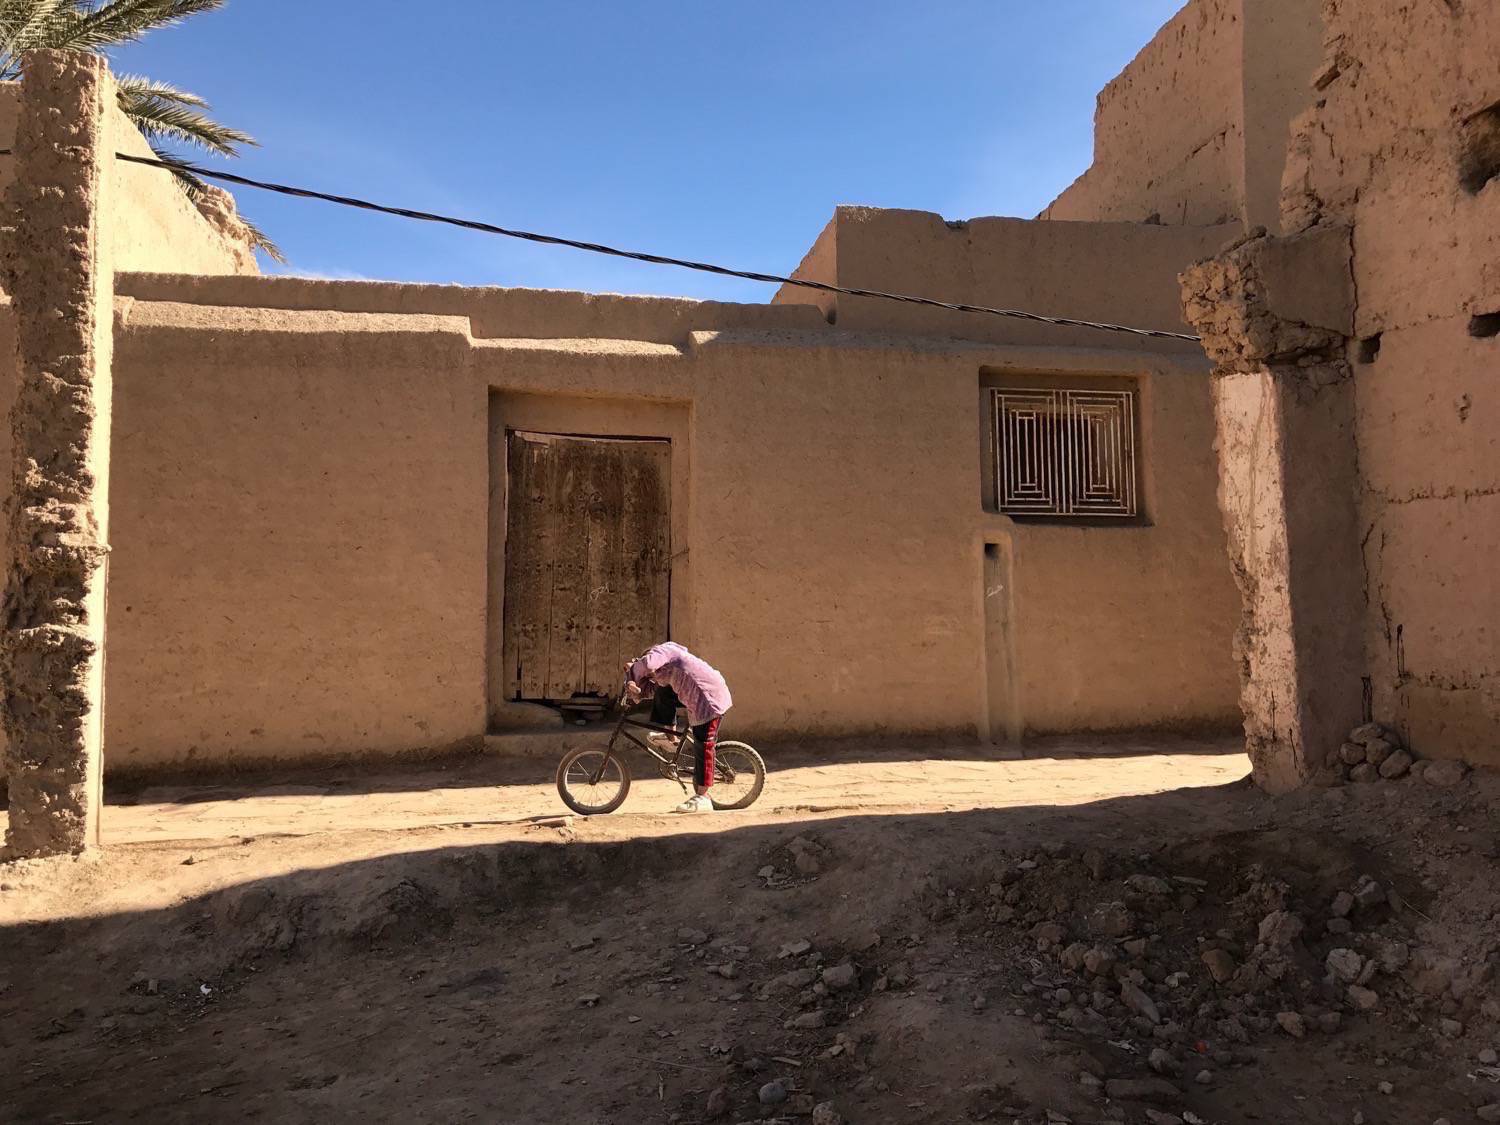 Ksar Rissani - Young girl on her bike heading to a school in an area outside the walls of the Ksar 